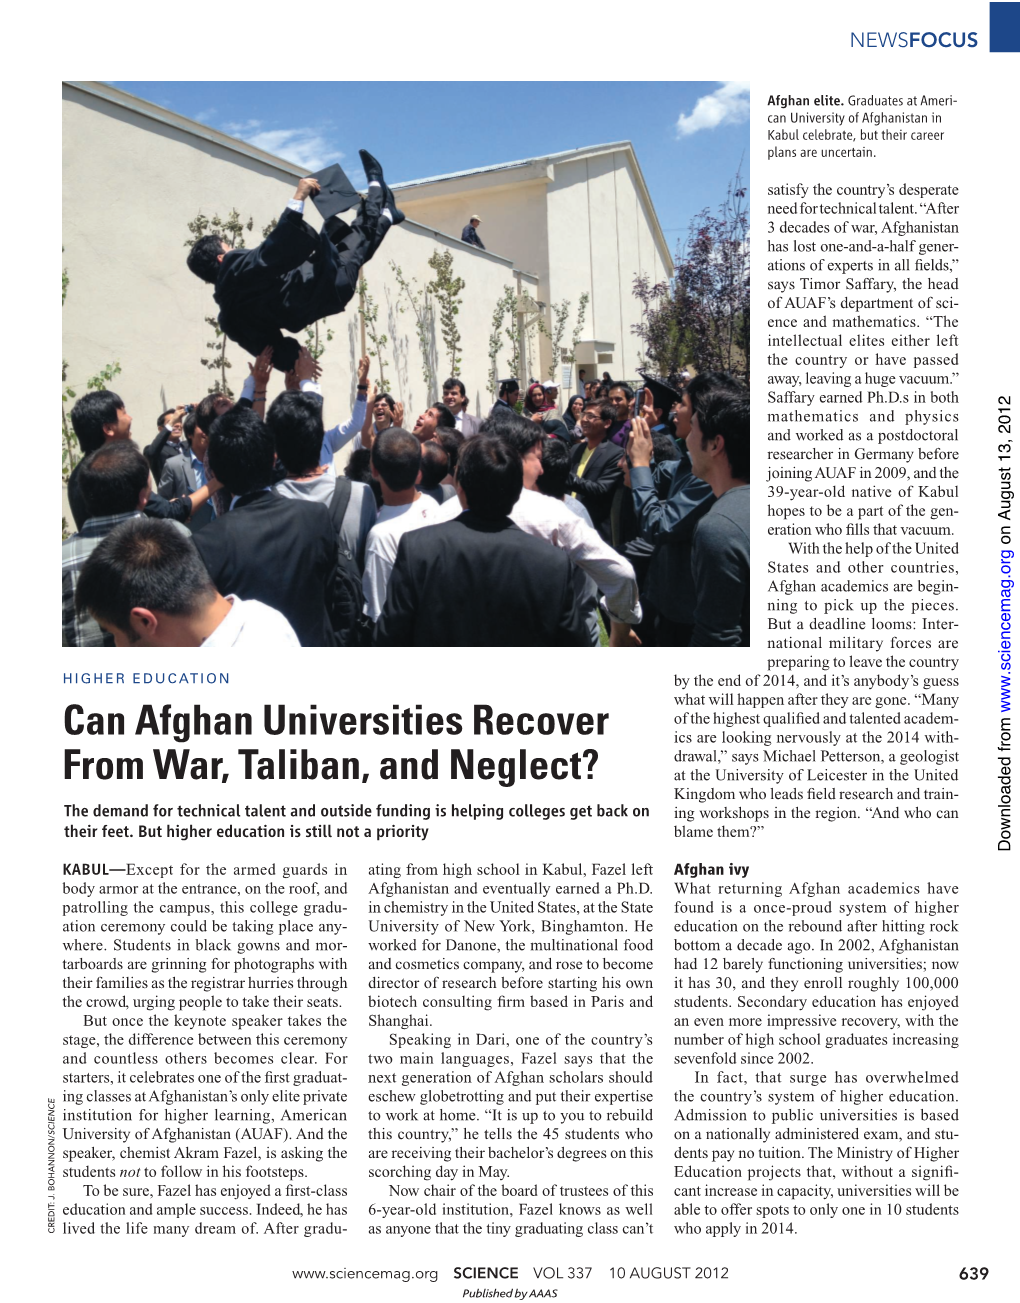 Can Afghan Universities Recover from War